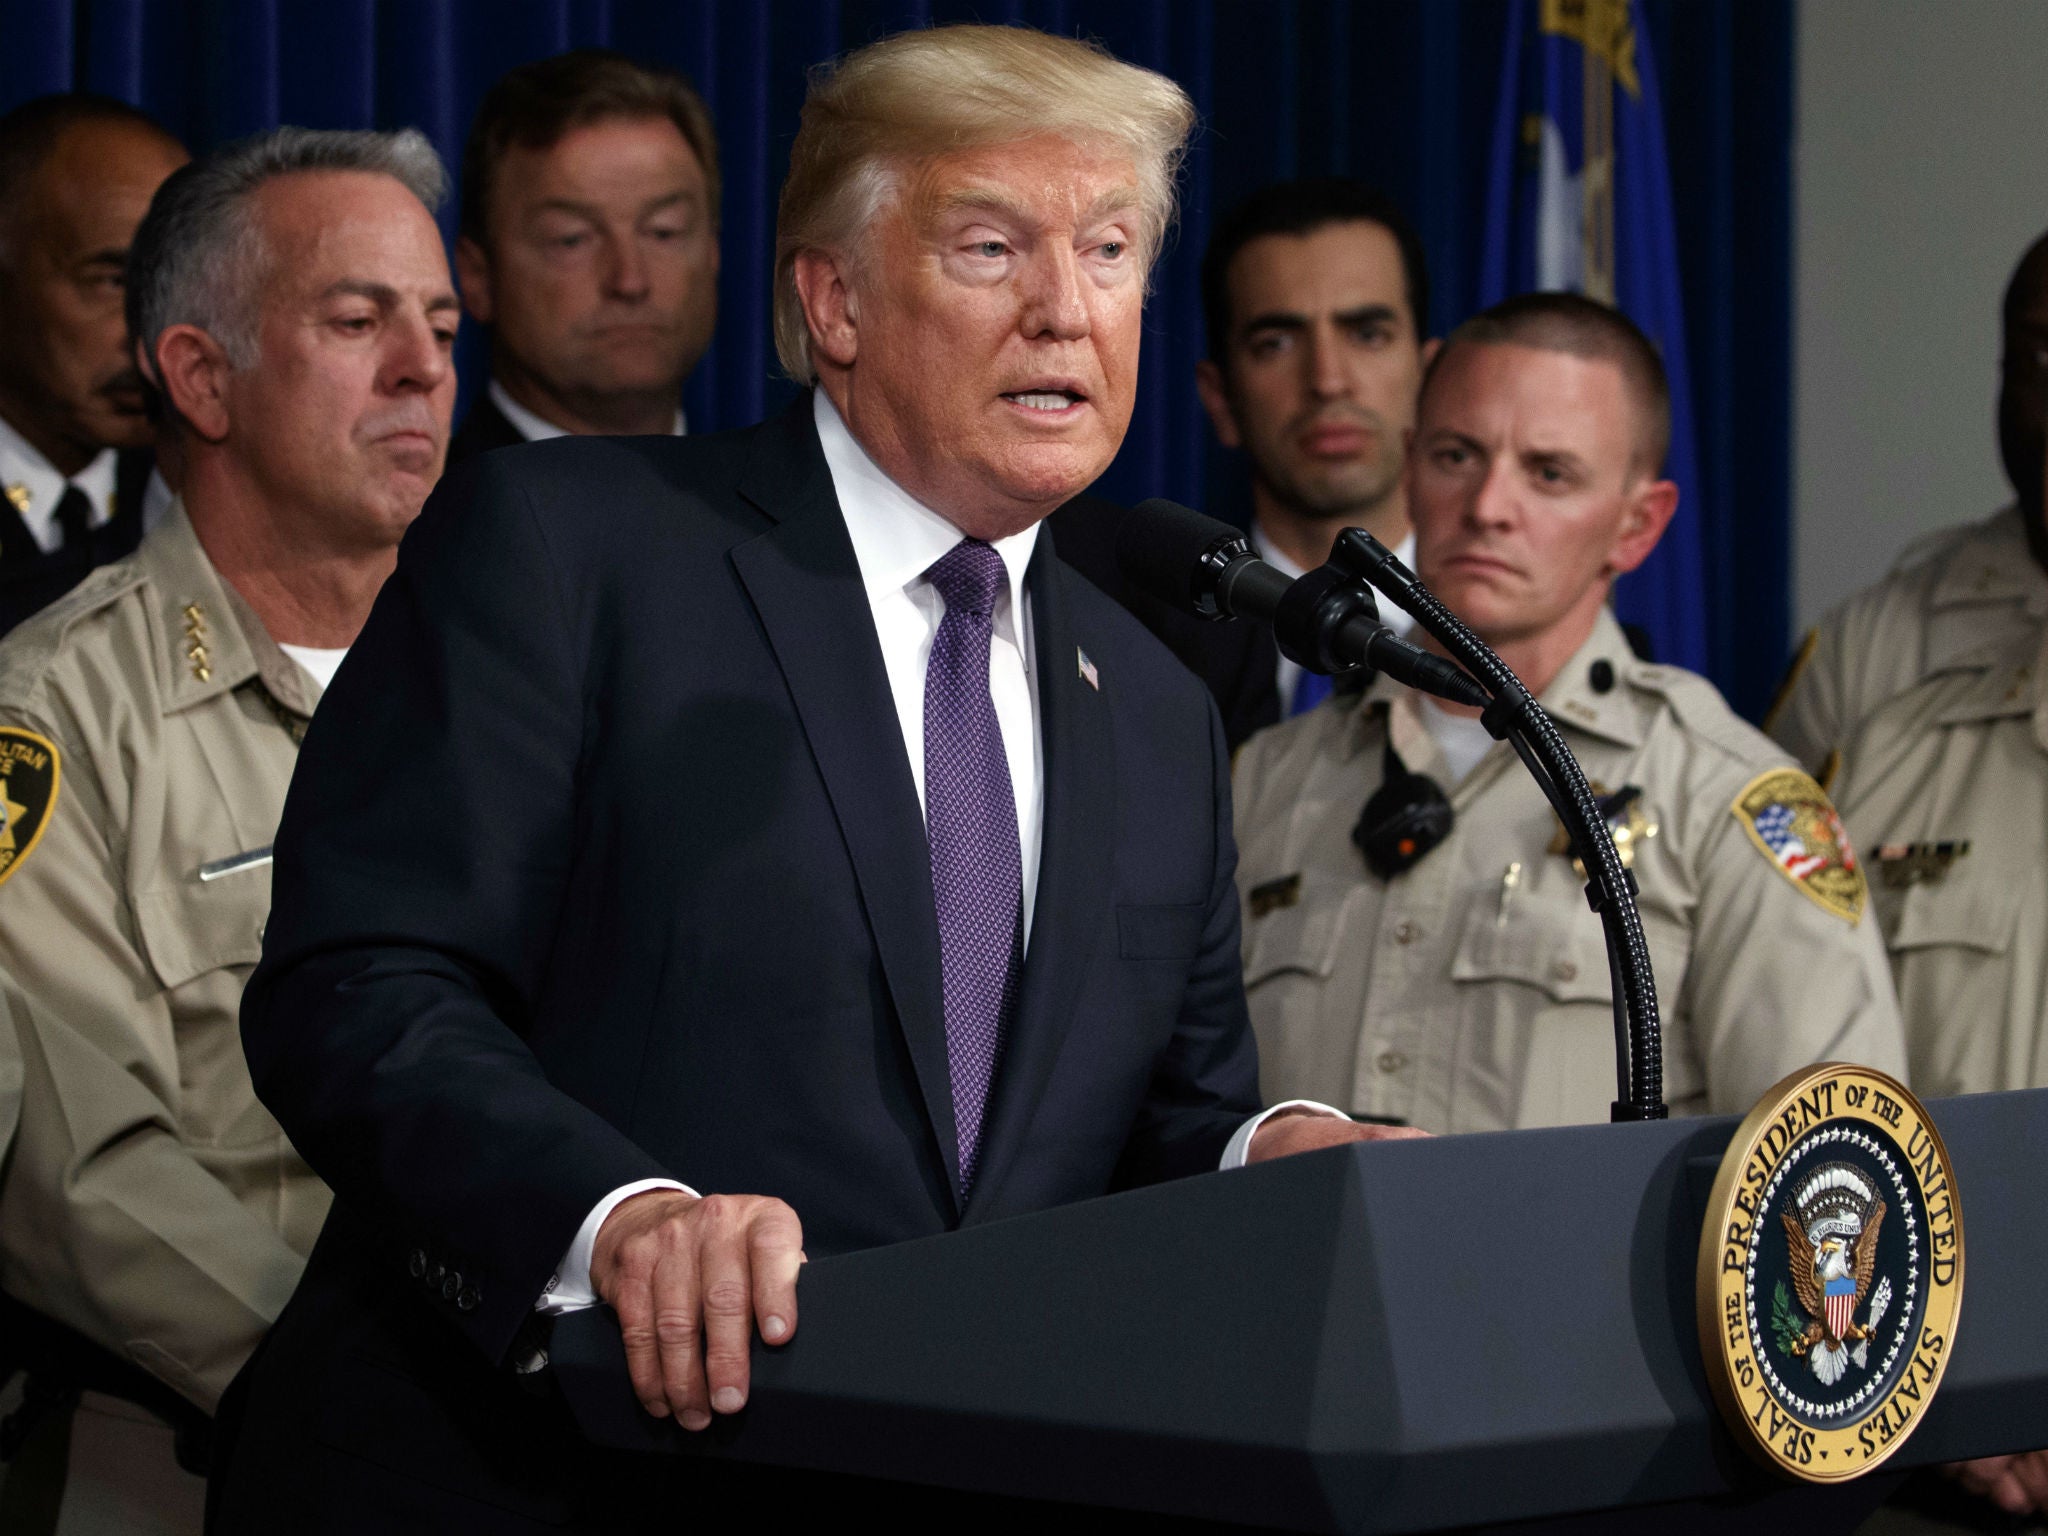 President Trump praised first responders and citizens who are donating blood